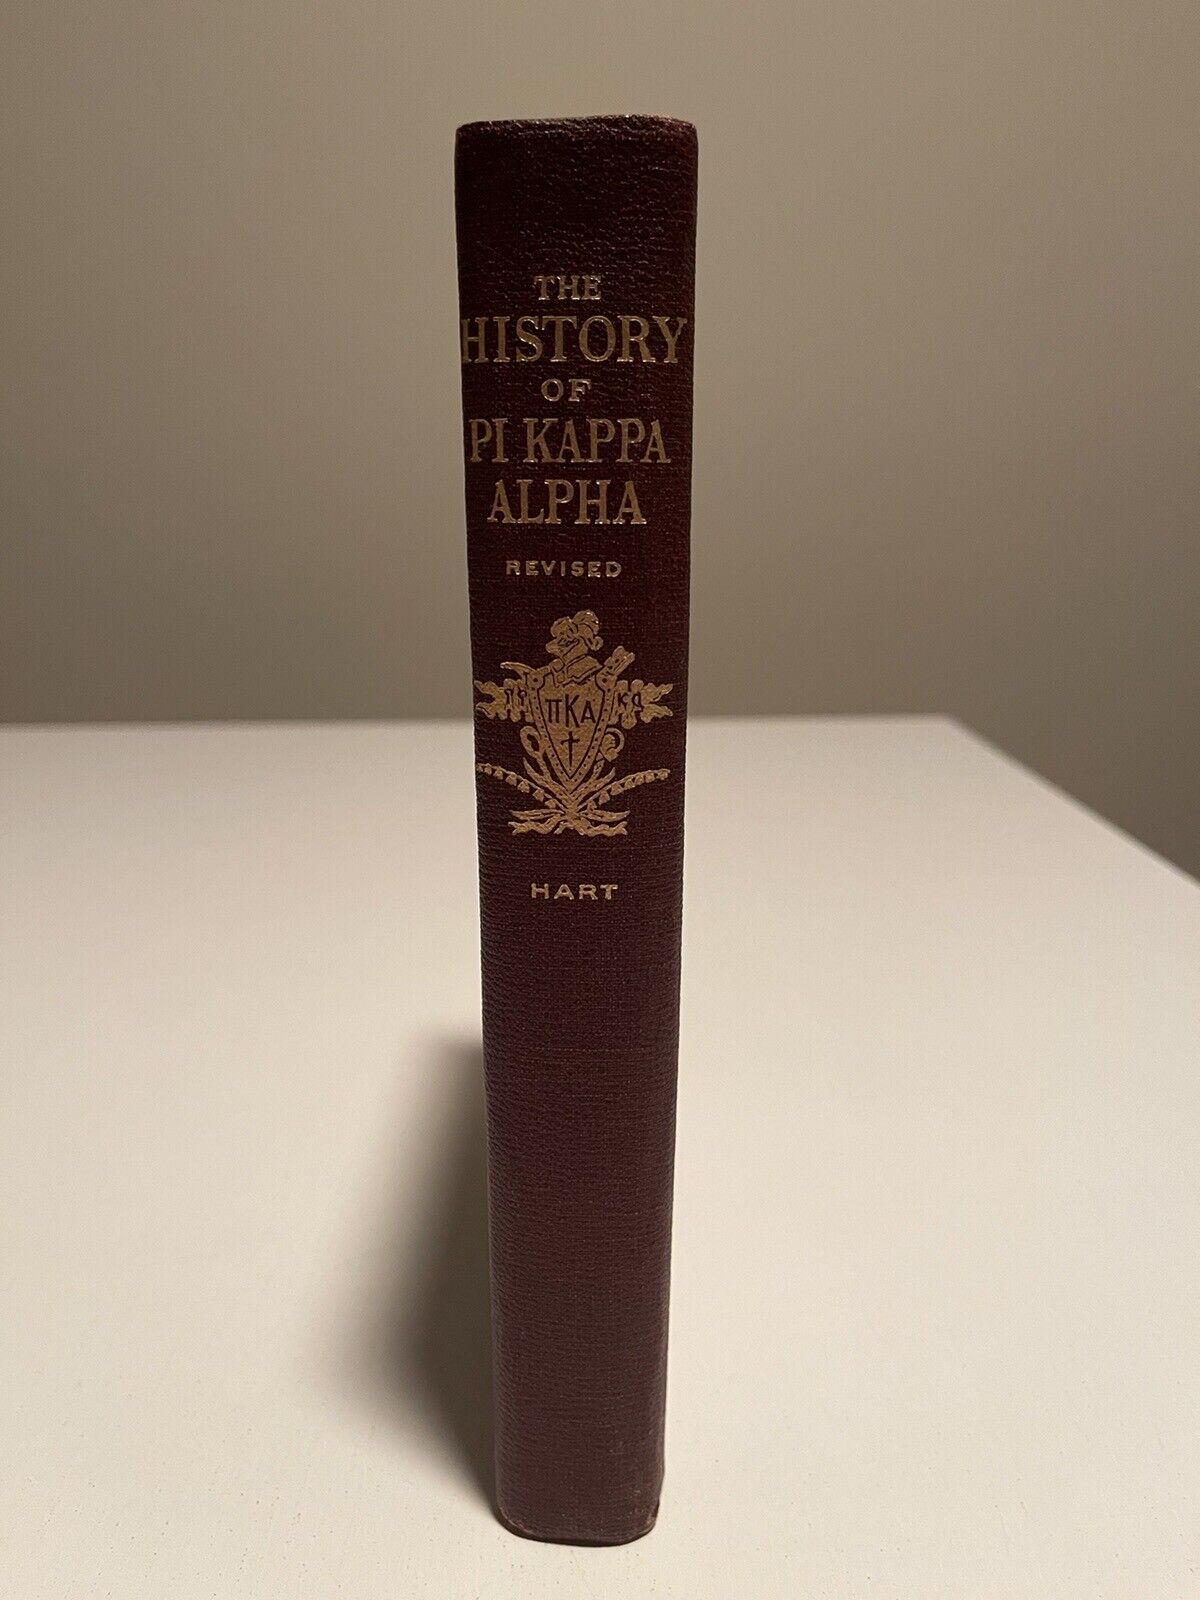 The History Of Pi Kappa Alpha Revised Hart Hardcover Tenth Printing 1953